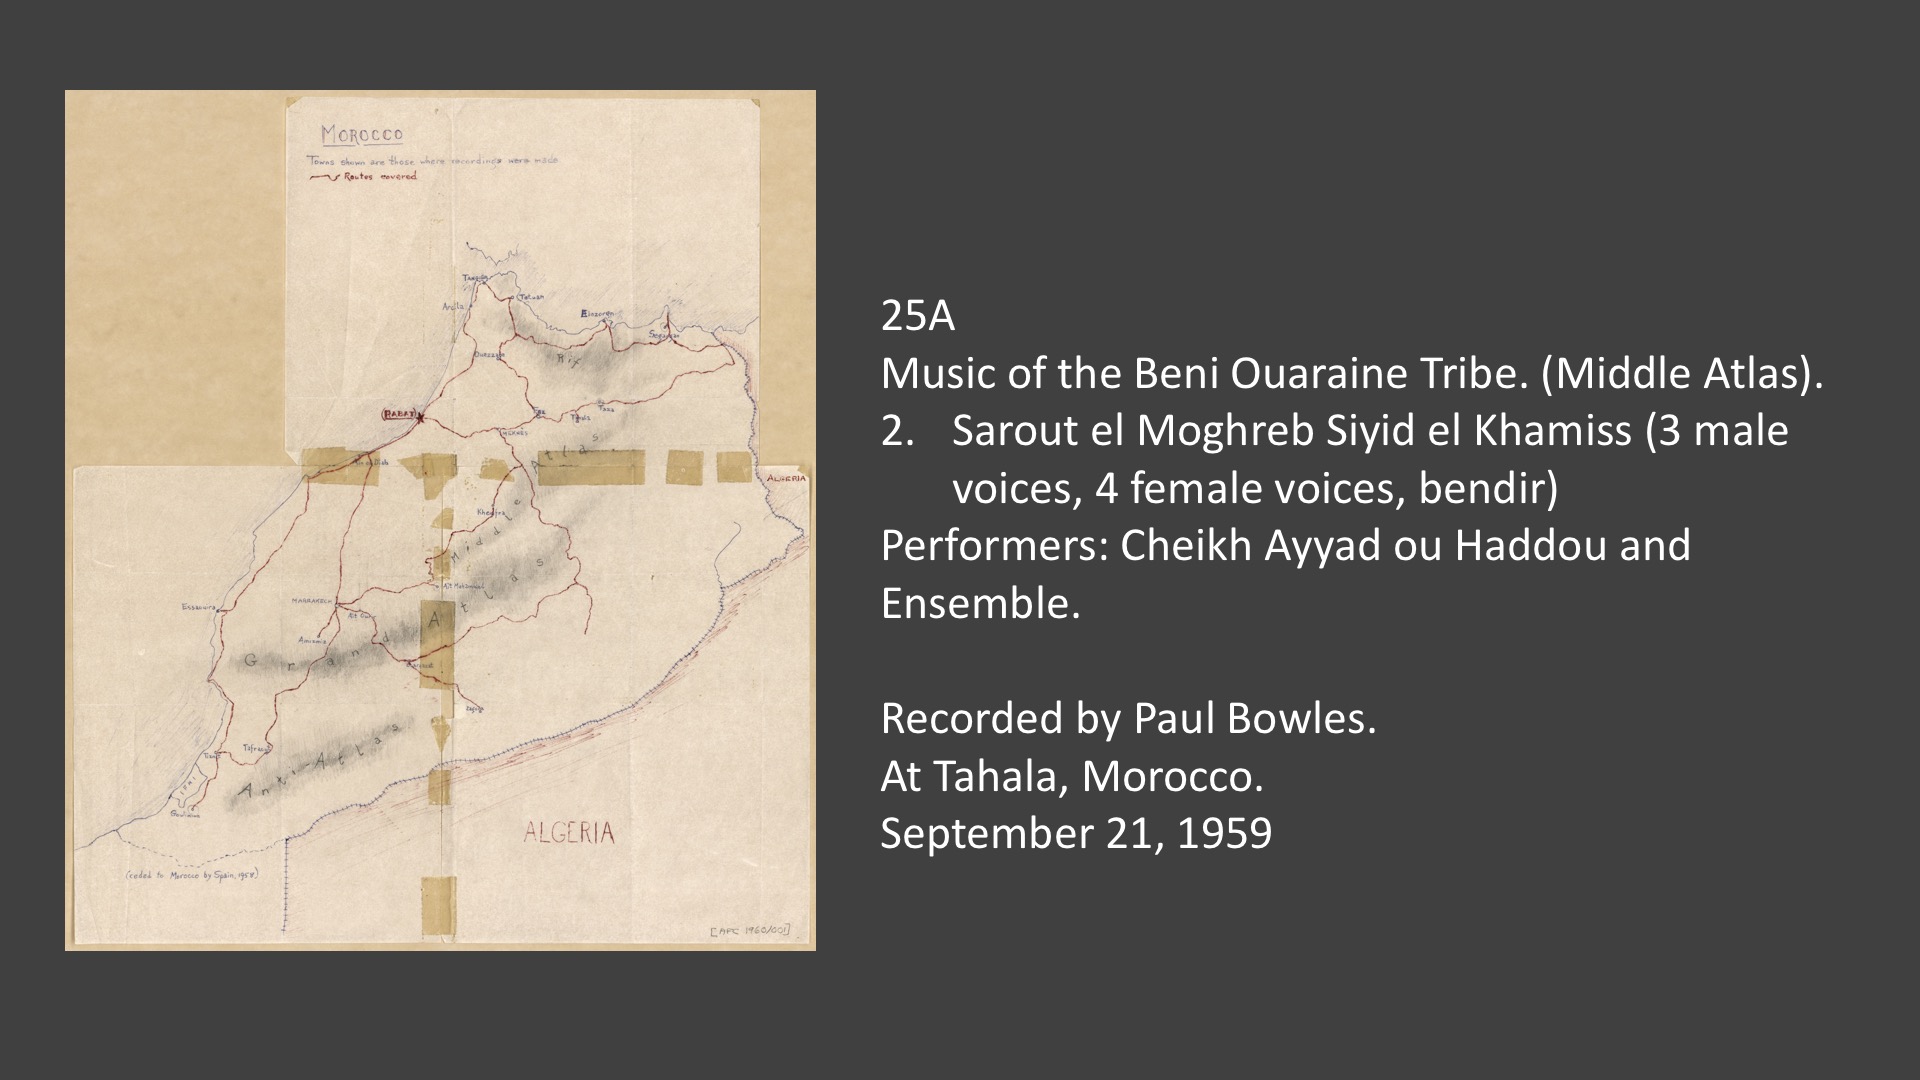 25A Music of the Beni Ouaraine Tribe. (Middle Atlas).
2. Sarout el Moghreb Siyid el Khamiss (3 male voices, 4 female voices, bendir).&nbsp; Performers: Cheikh Ayyad ou Haddou and Ensemble.